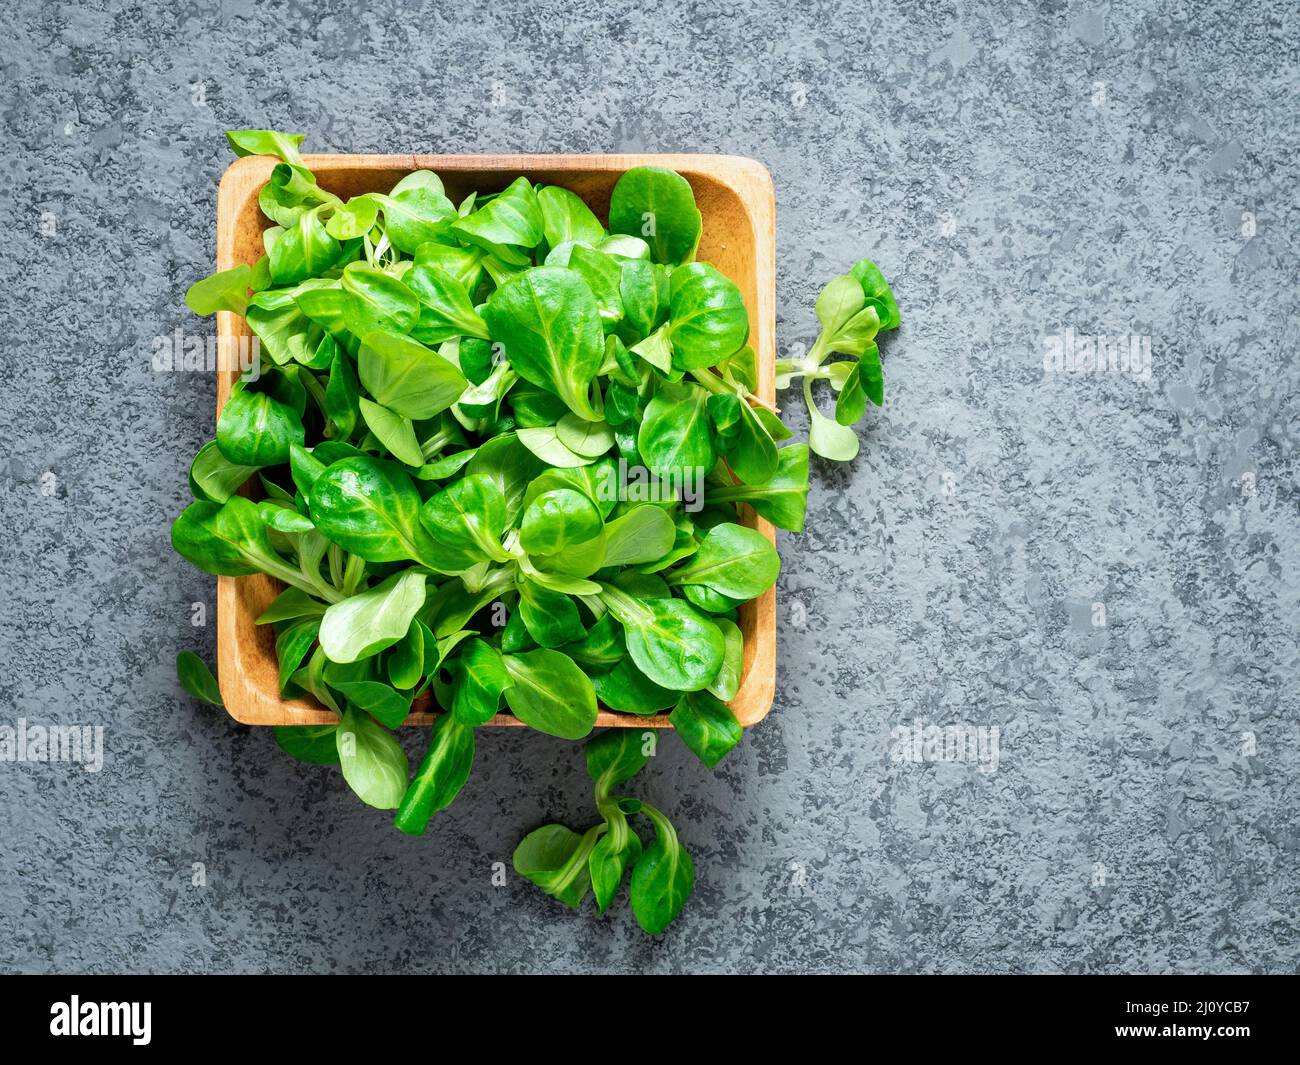 Wooden bowl with corn salad leaves, lamb's lettuce on gray stone background, top view. Stock Photo